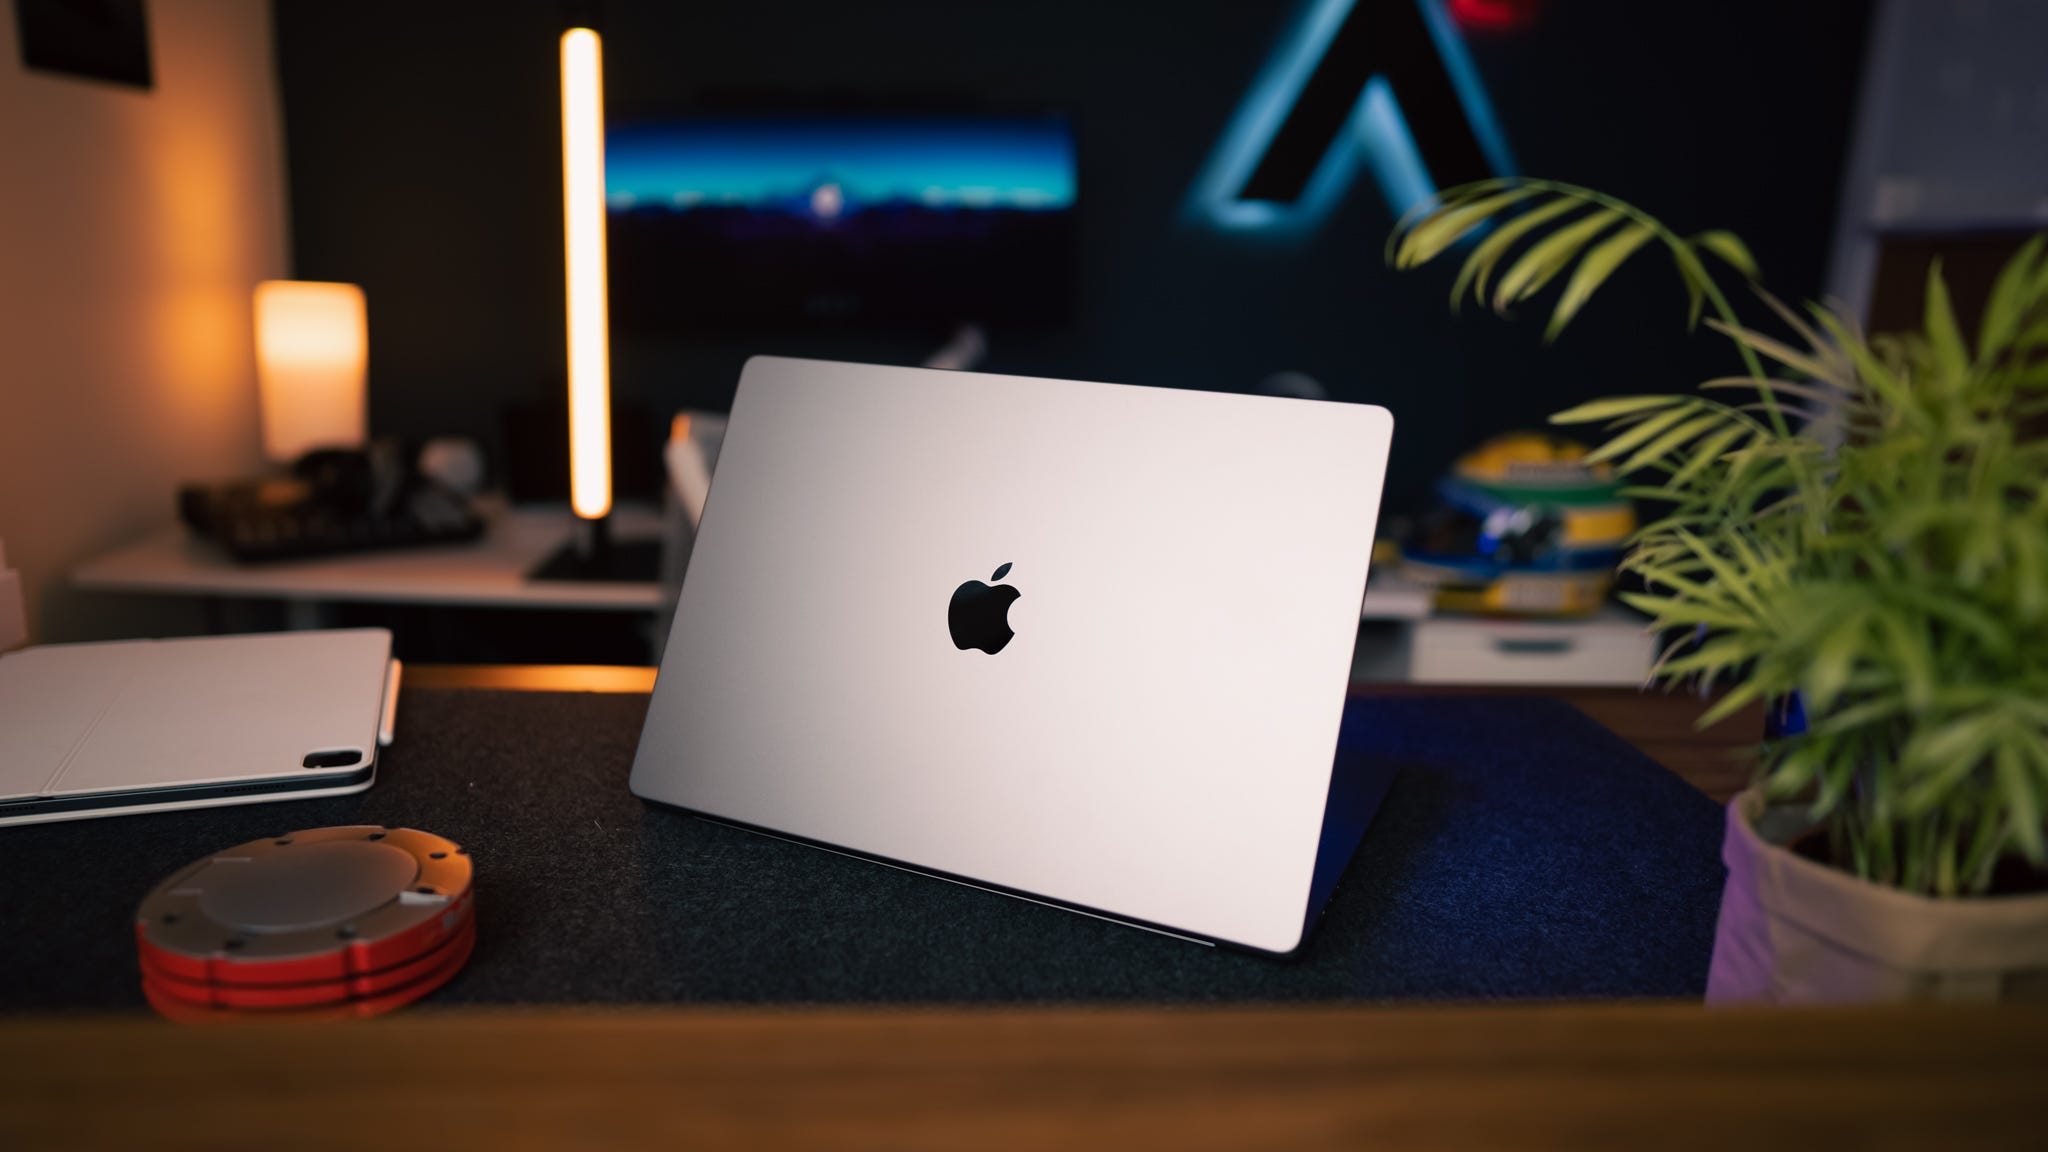 Apple's Mac Studio with the M1 max does not have any performance